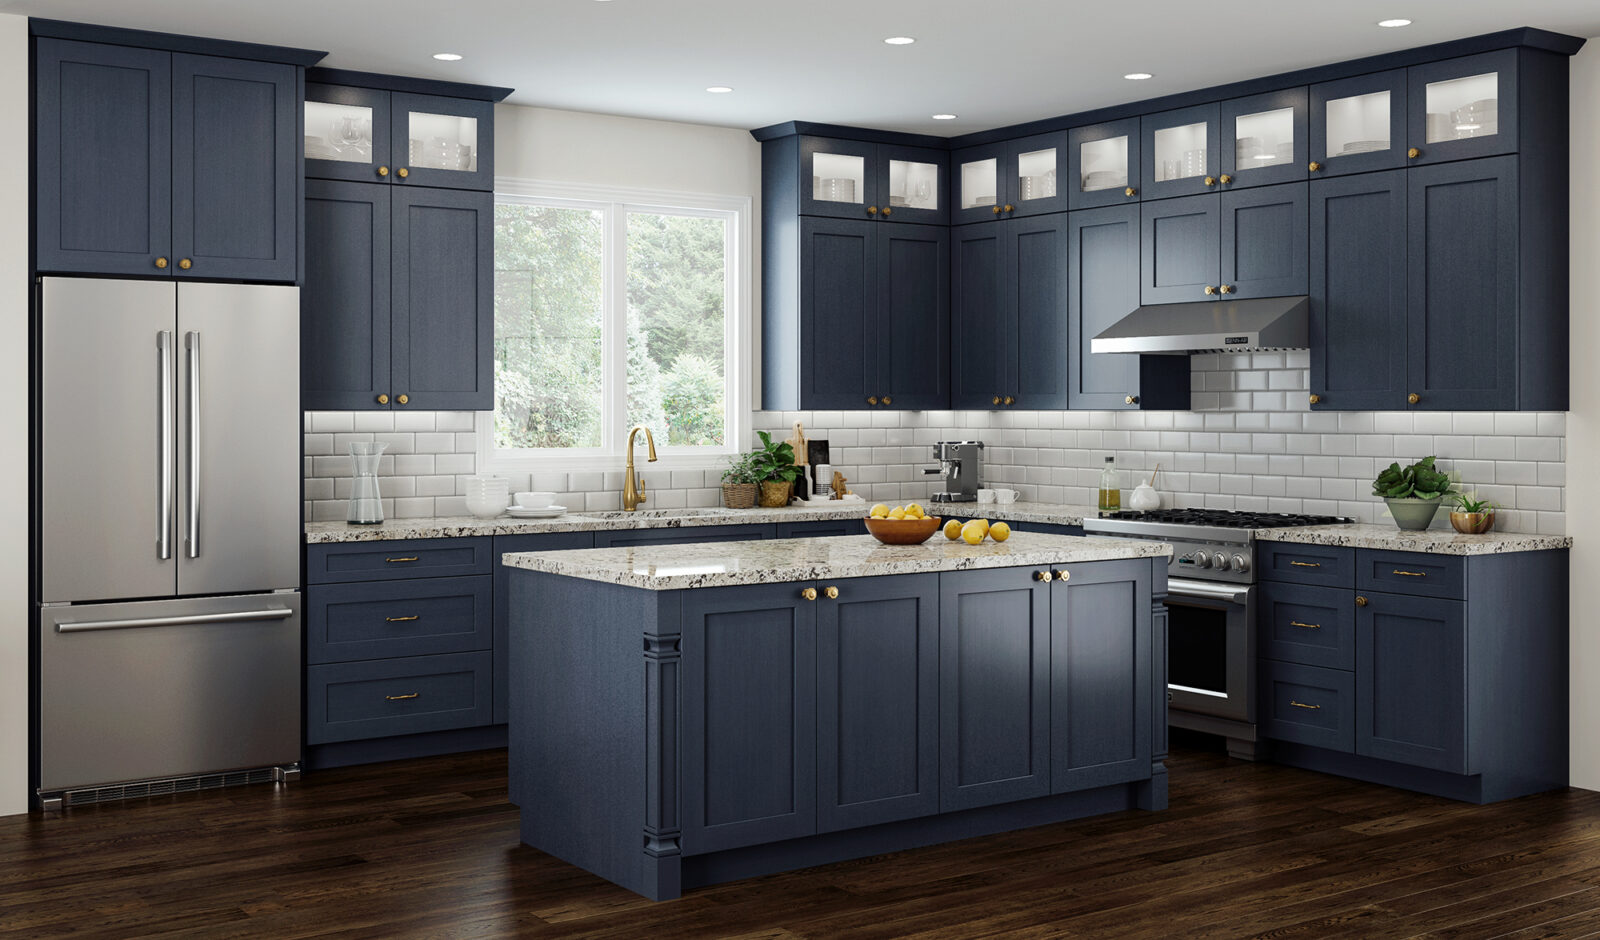 Select Cabinets - Kona Cabinetry